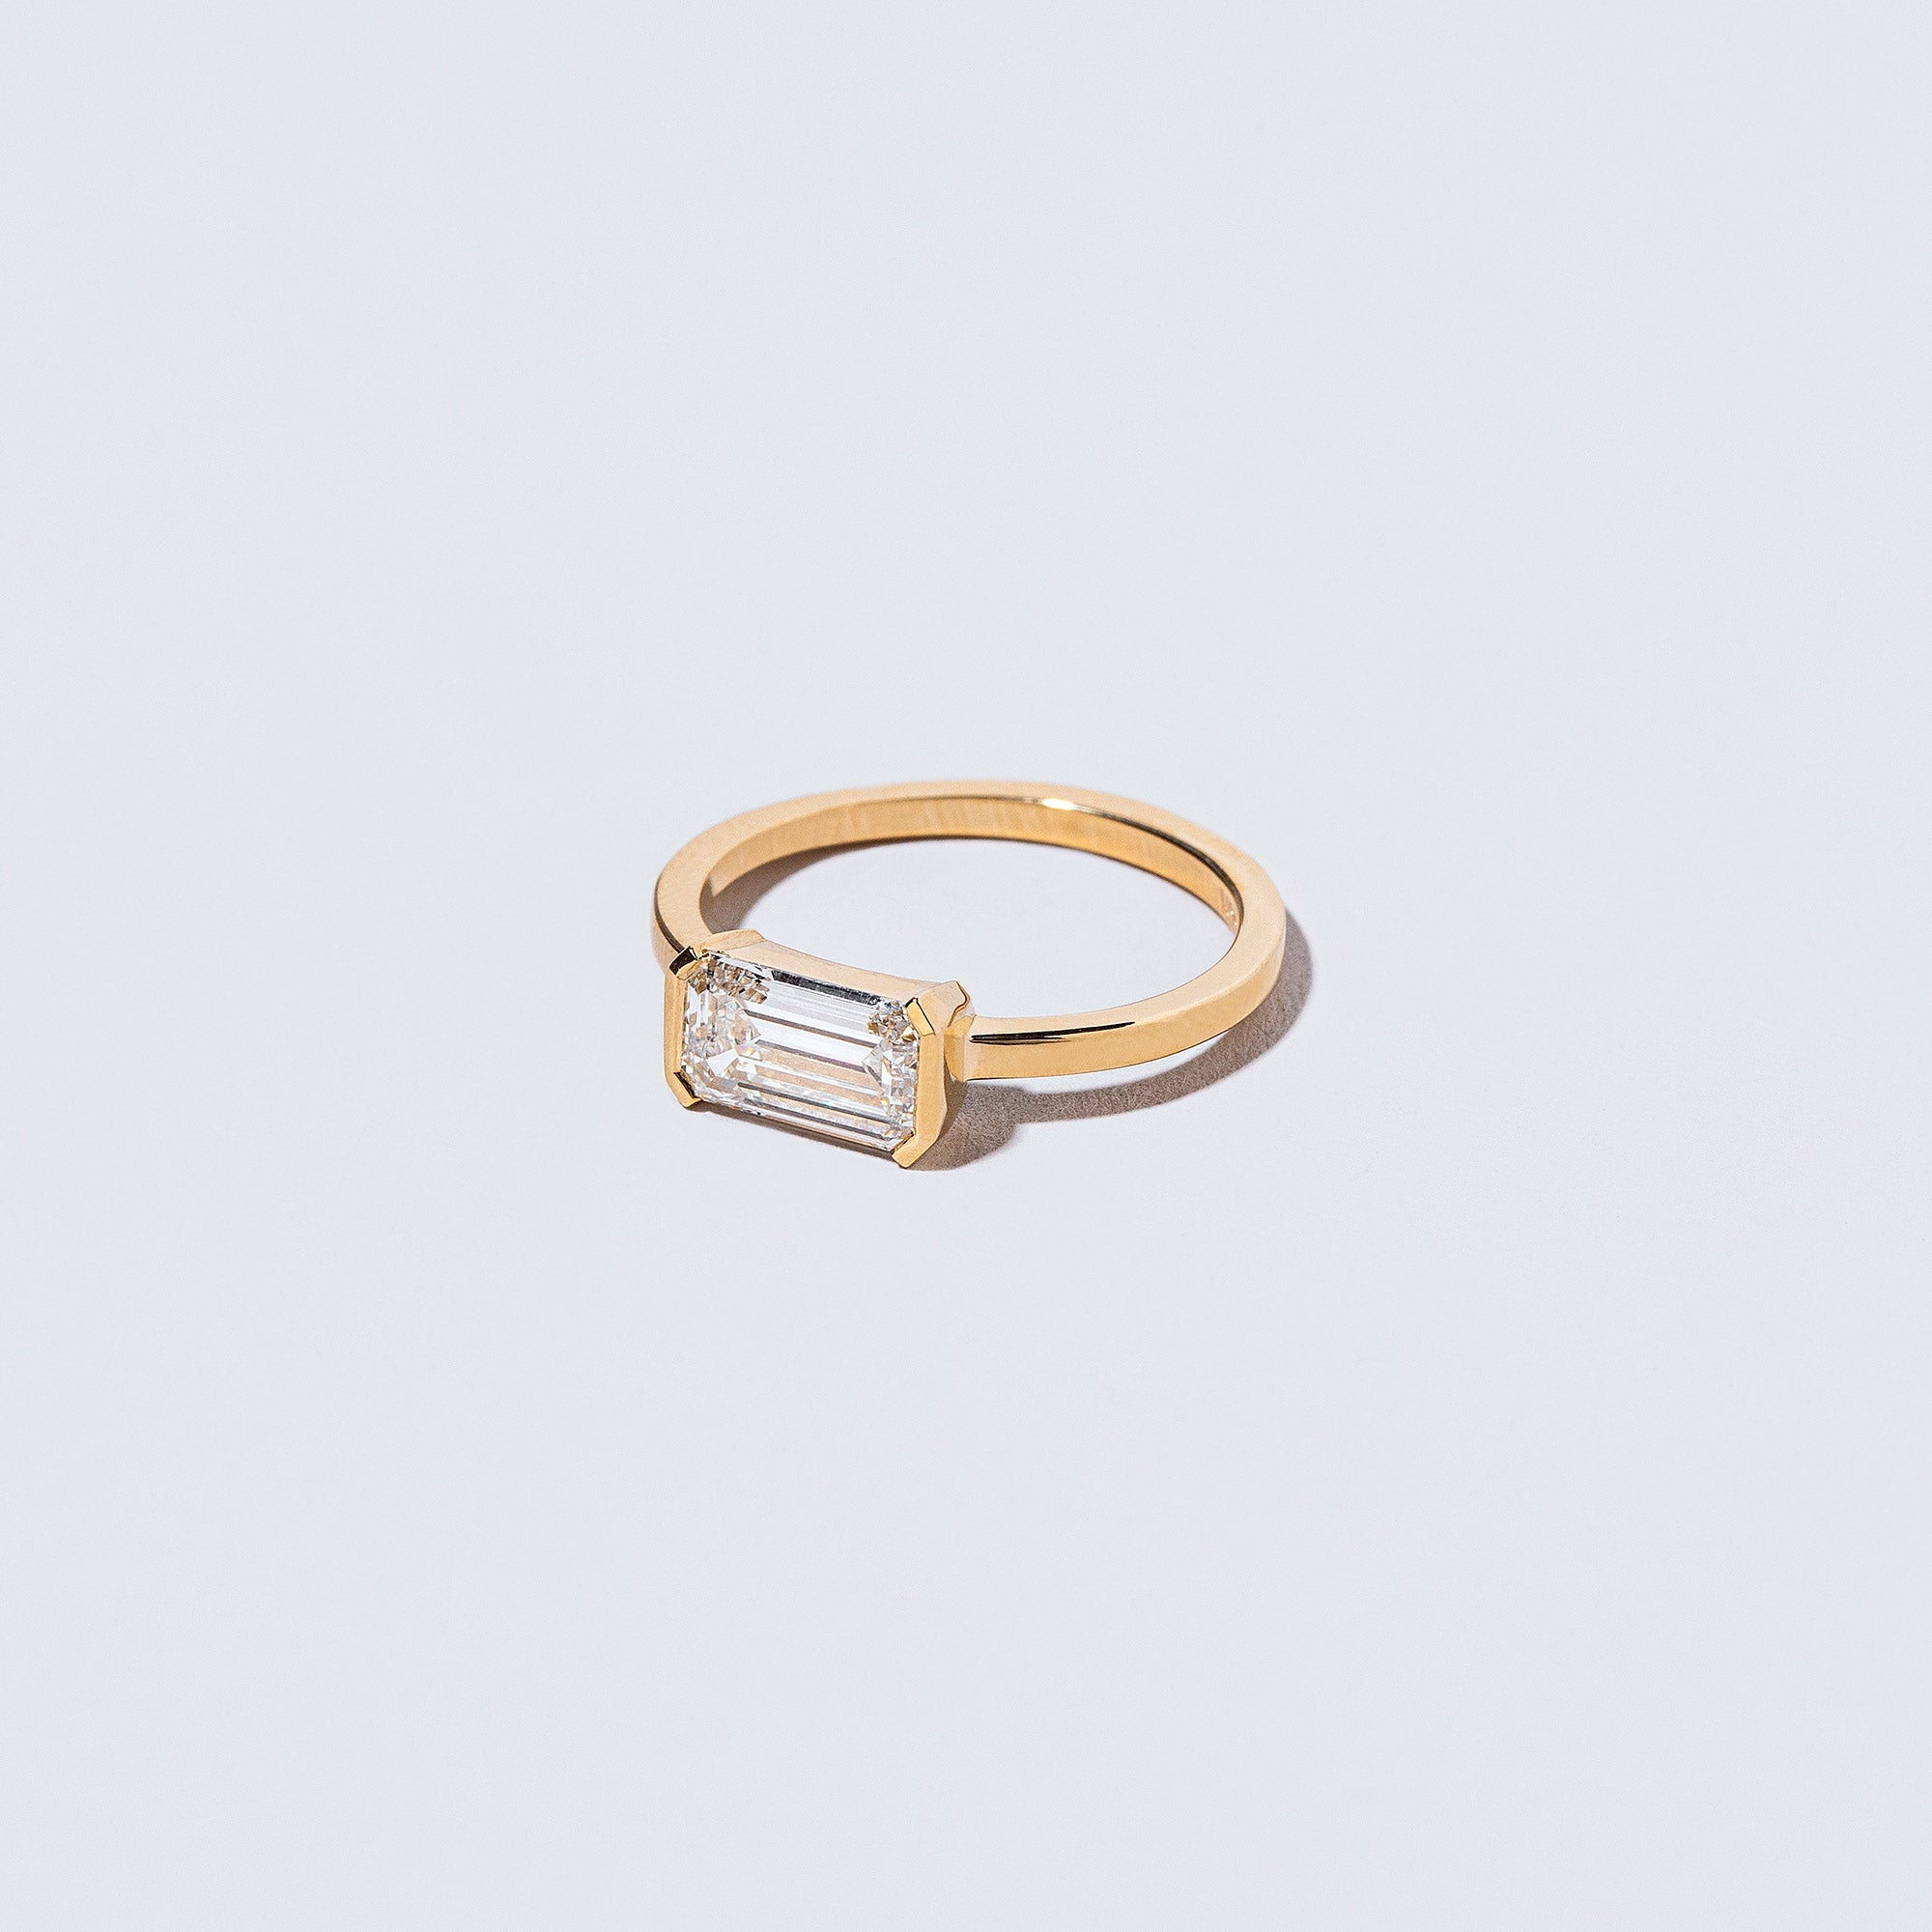 product_details:: Constant Ring on light color background.